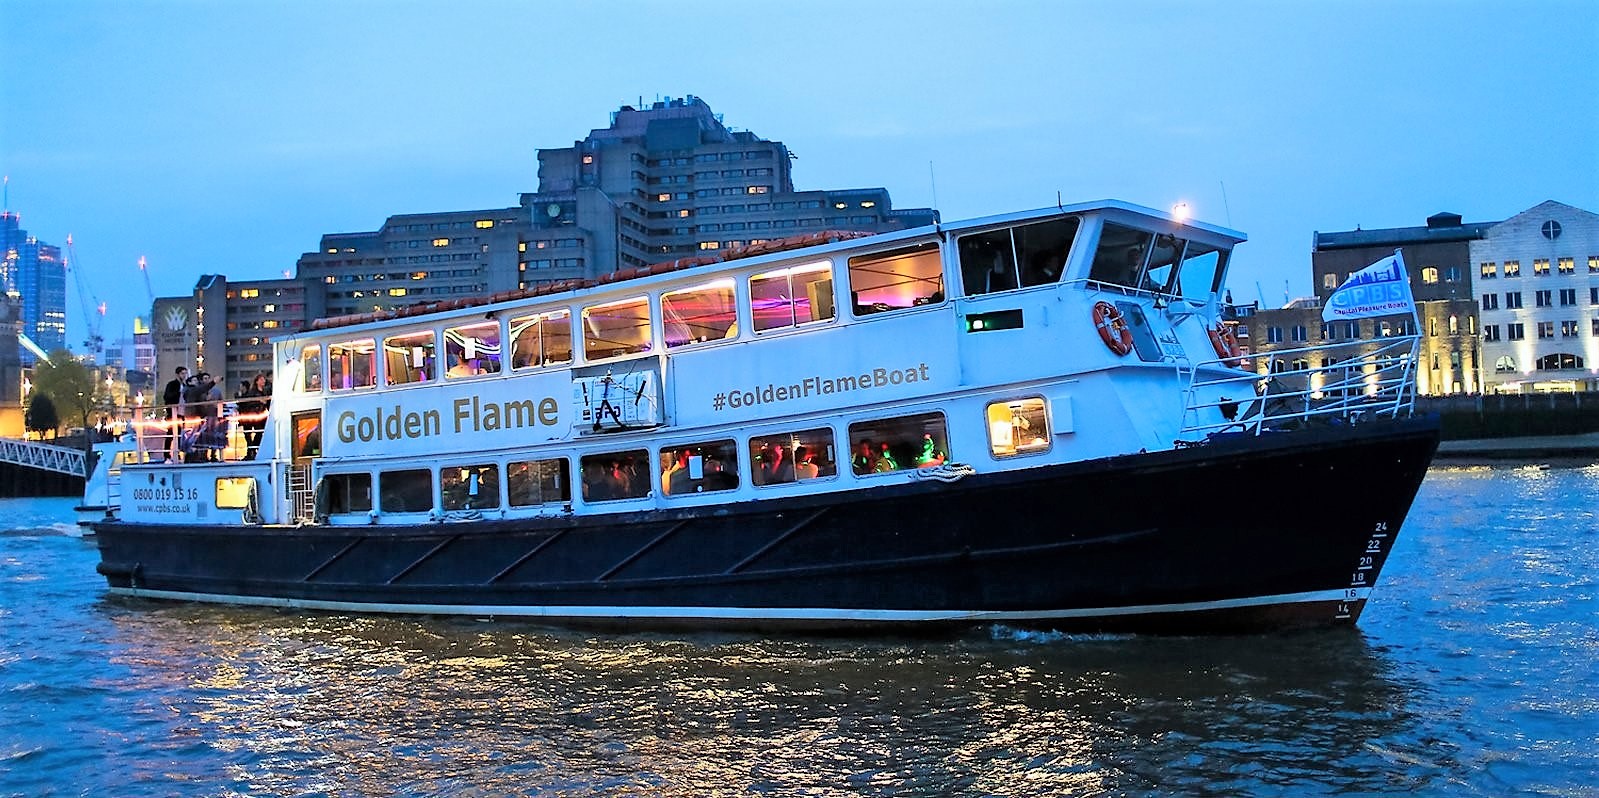 Big-fleet-of-London-party-boats-used-for-the-Thames-party-cruise